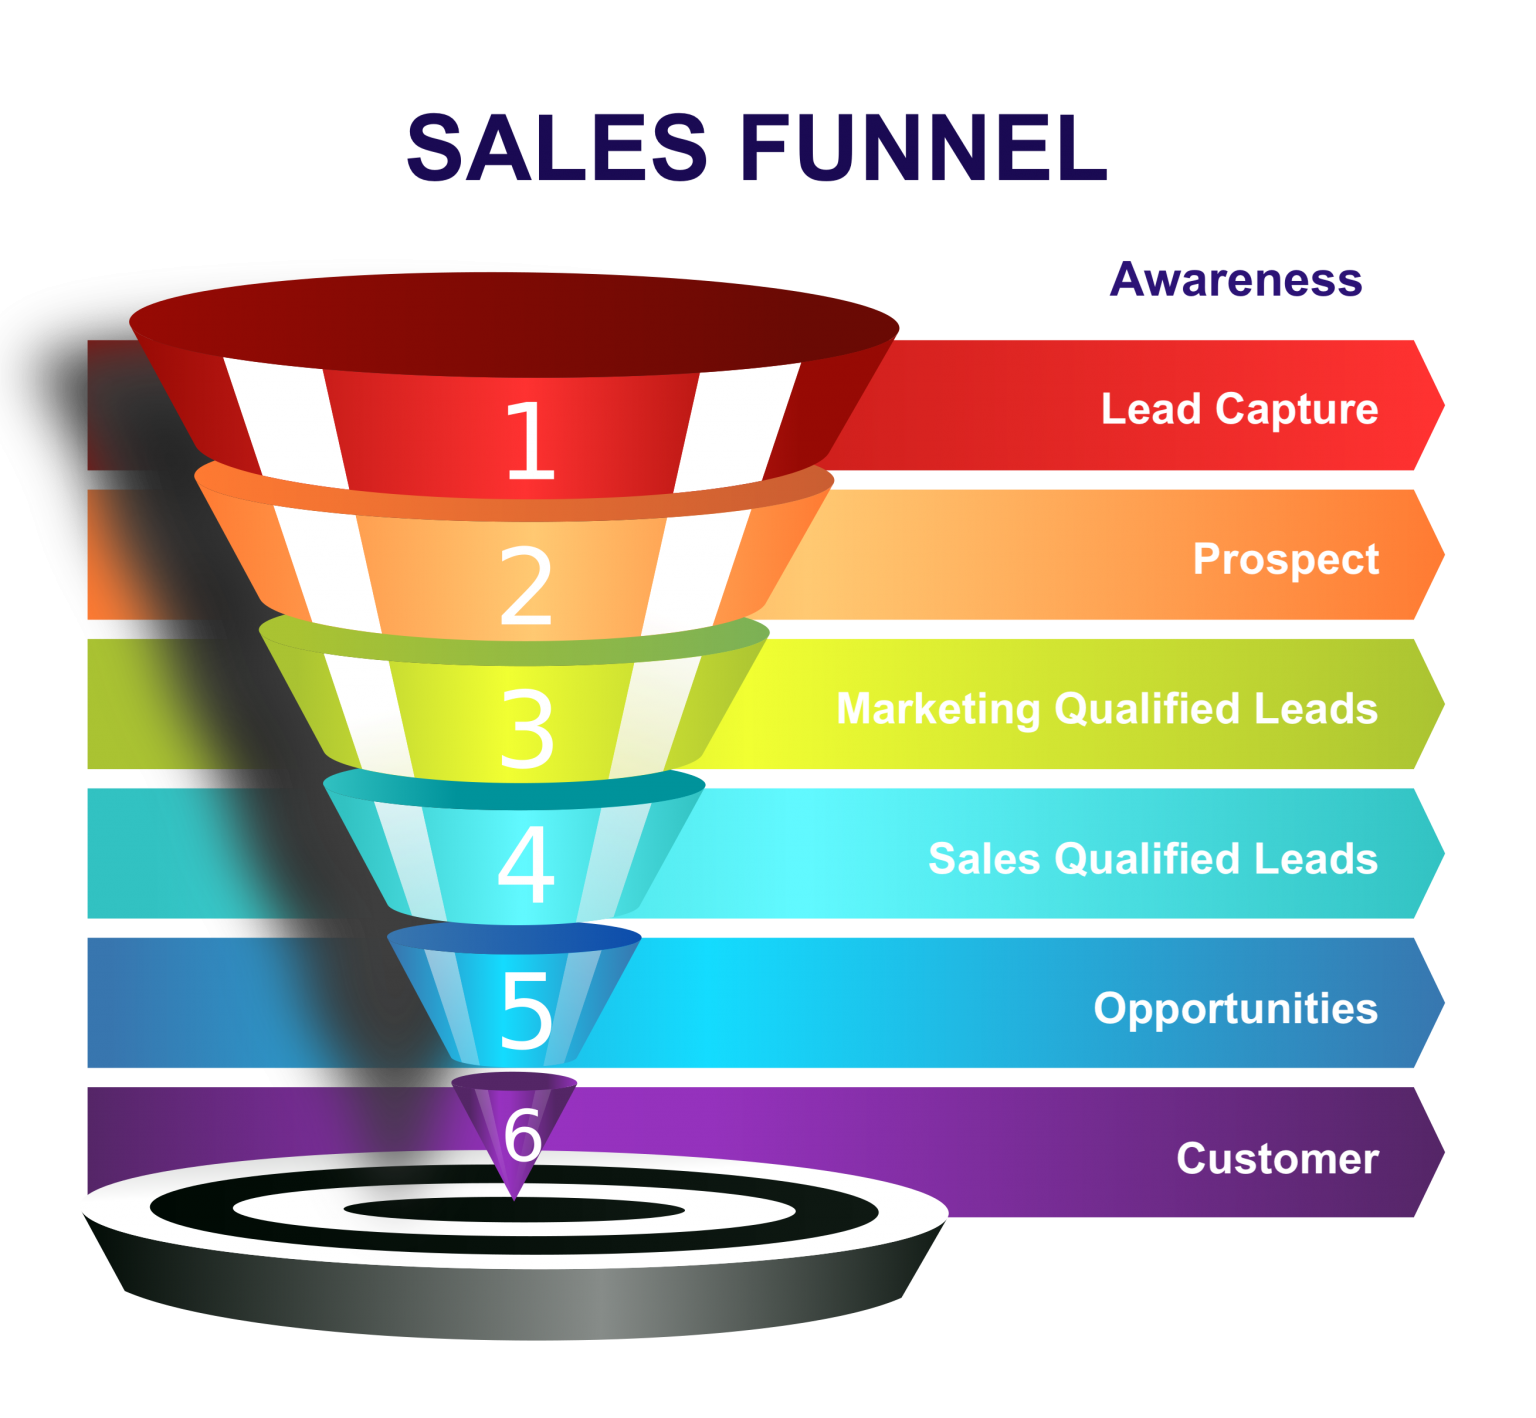 Sales Funnel Services - Digital Marketing Funnel Services Malaysia